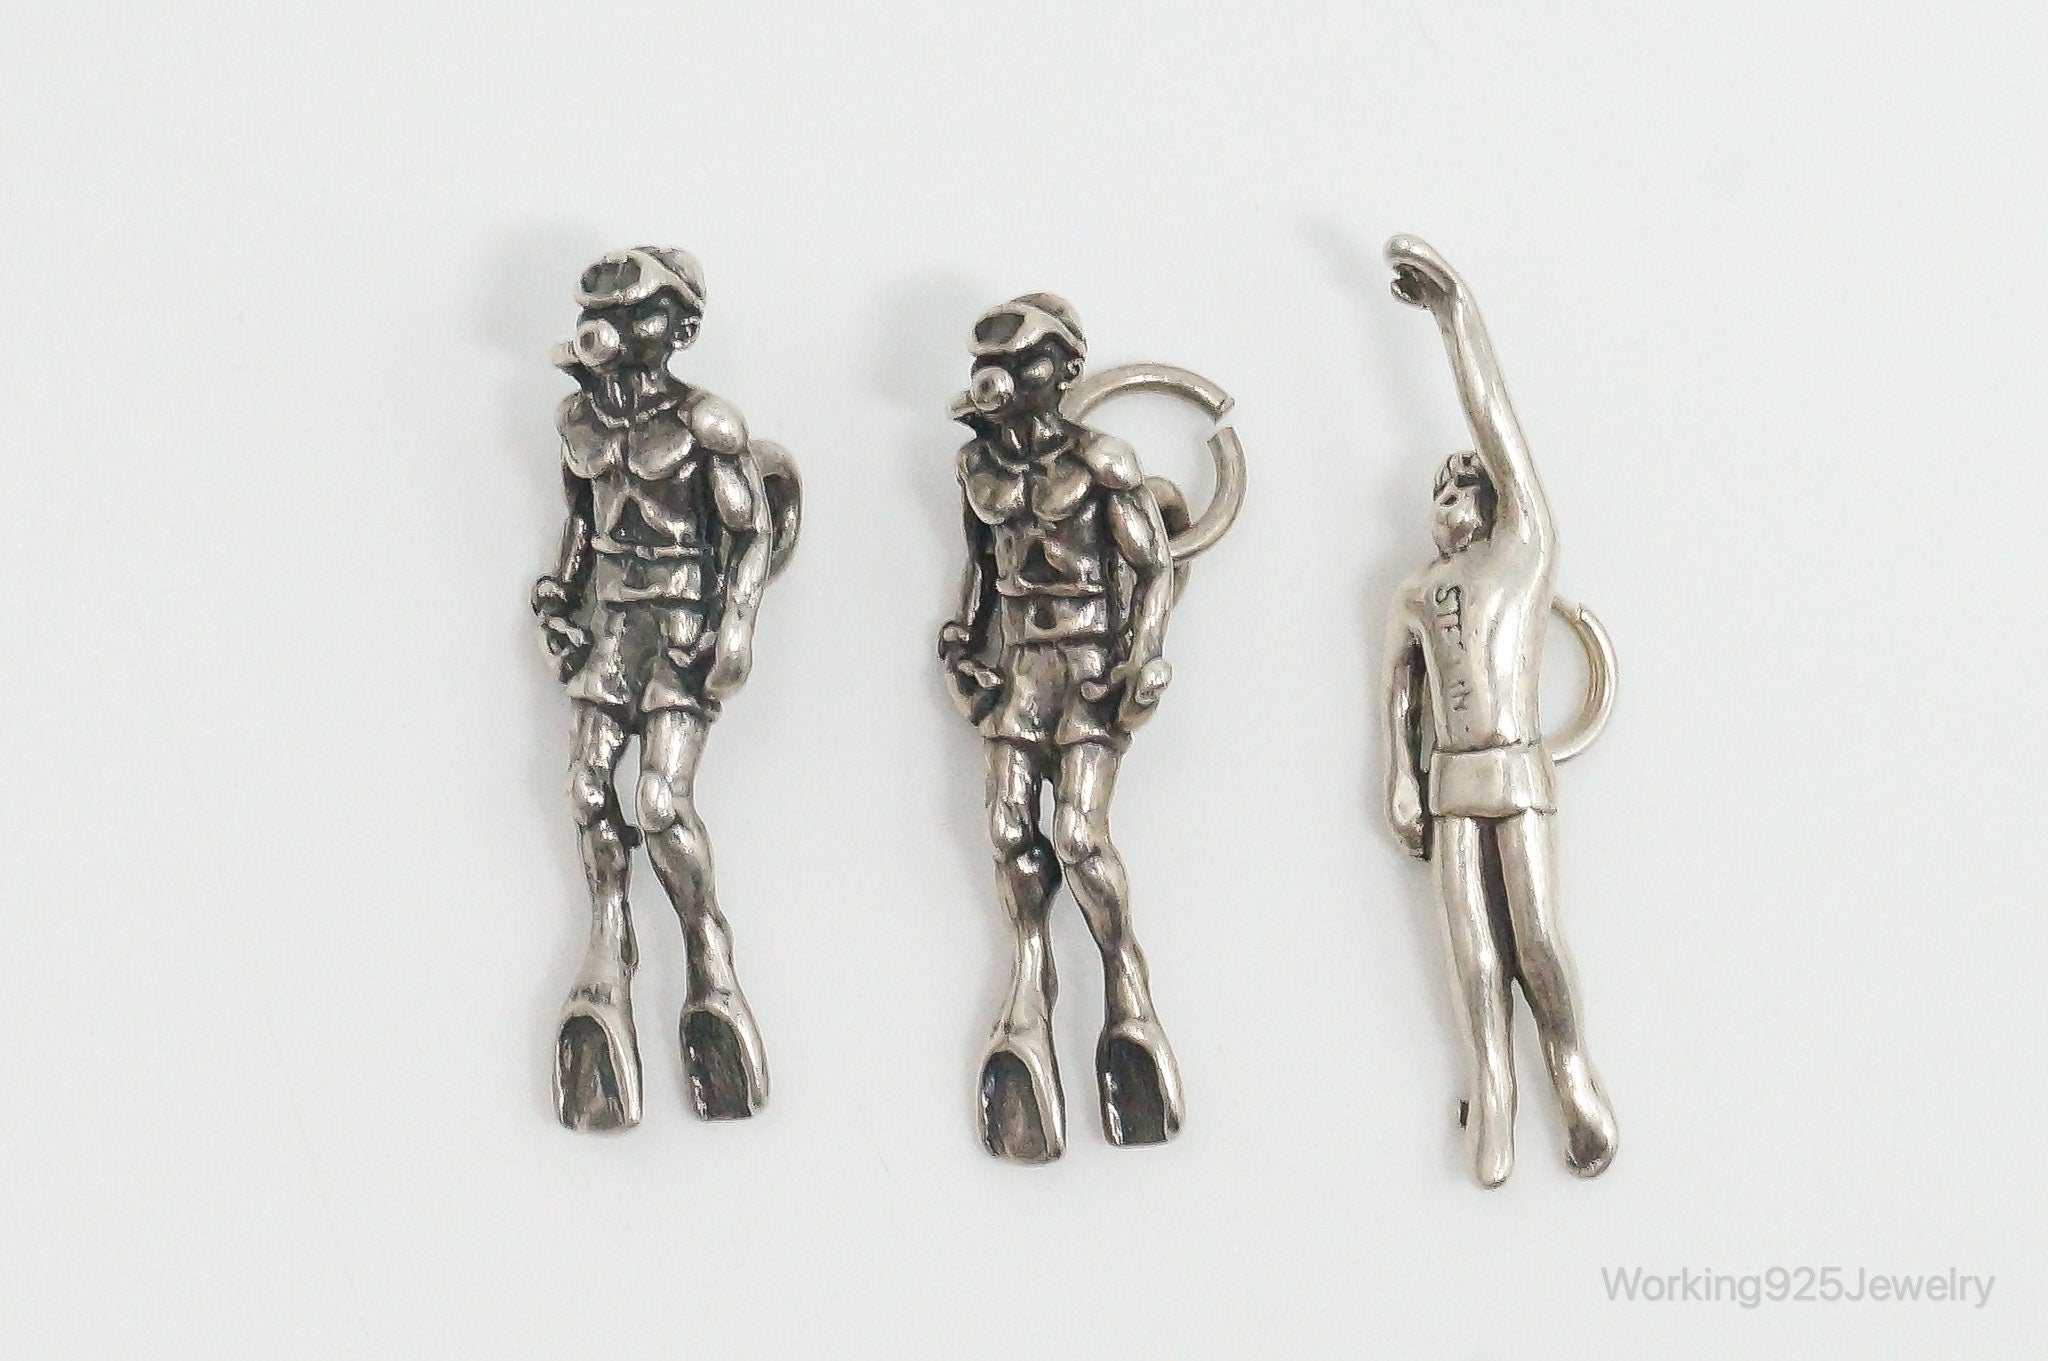 Vintage Swimming Scuba Diving Hobbies Sterling Silver Charms Lot